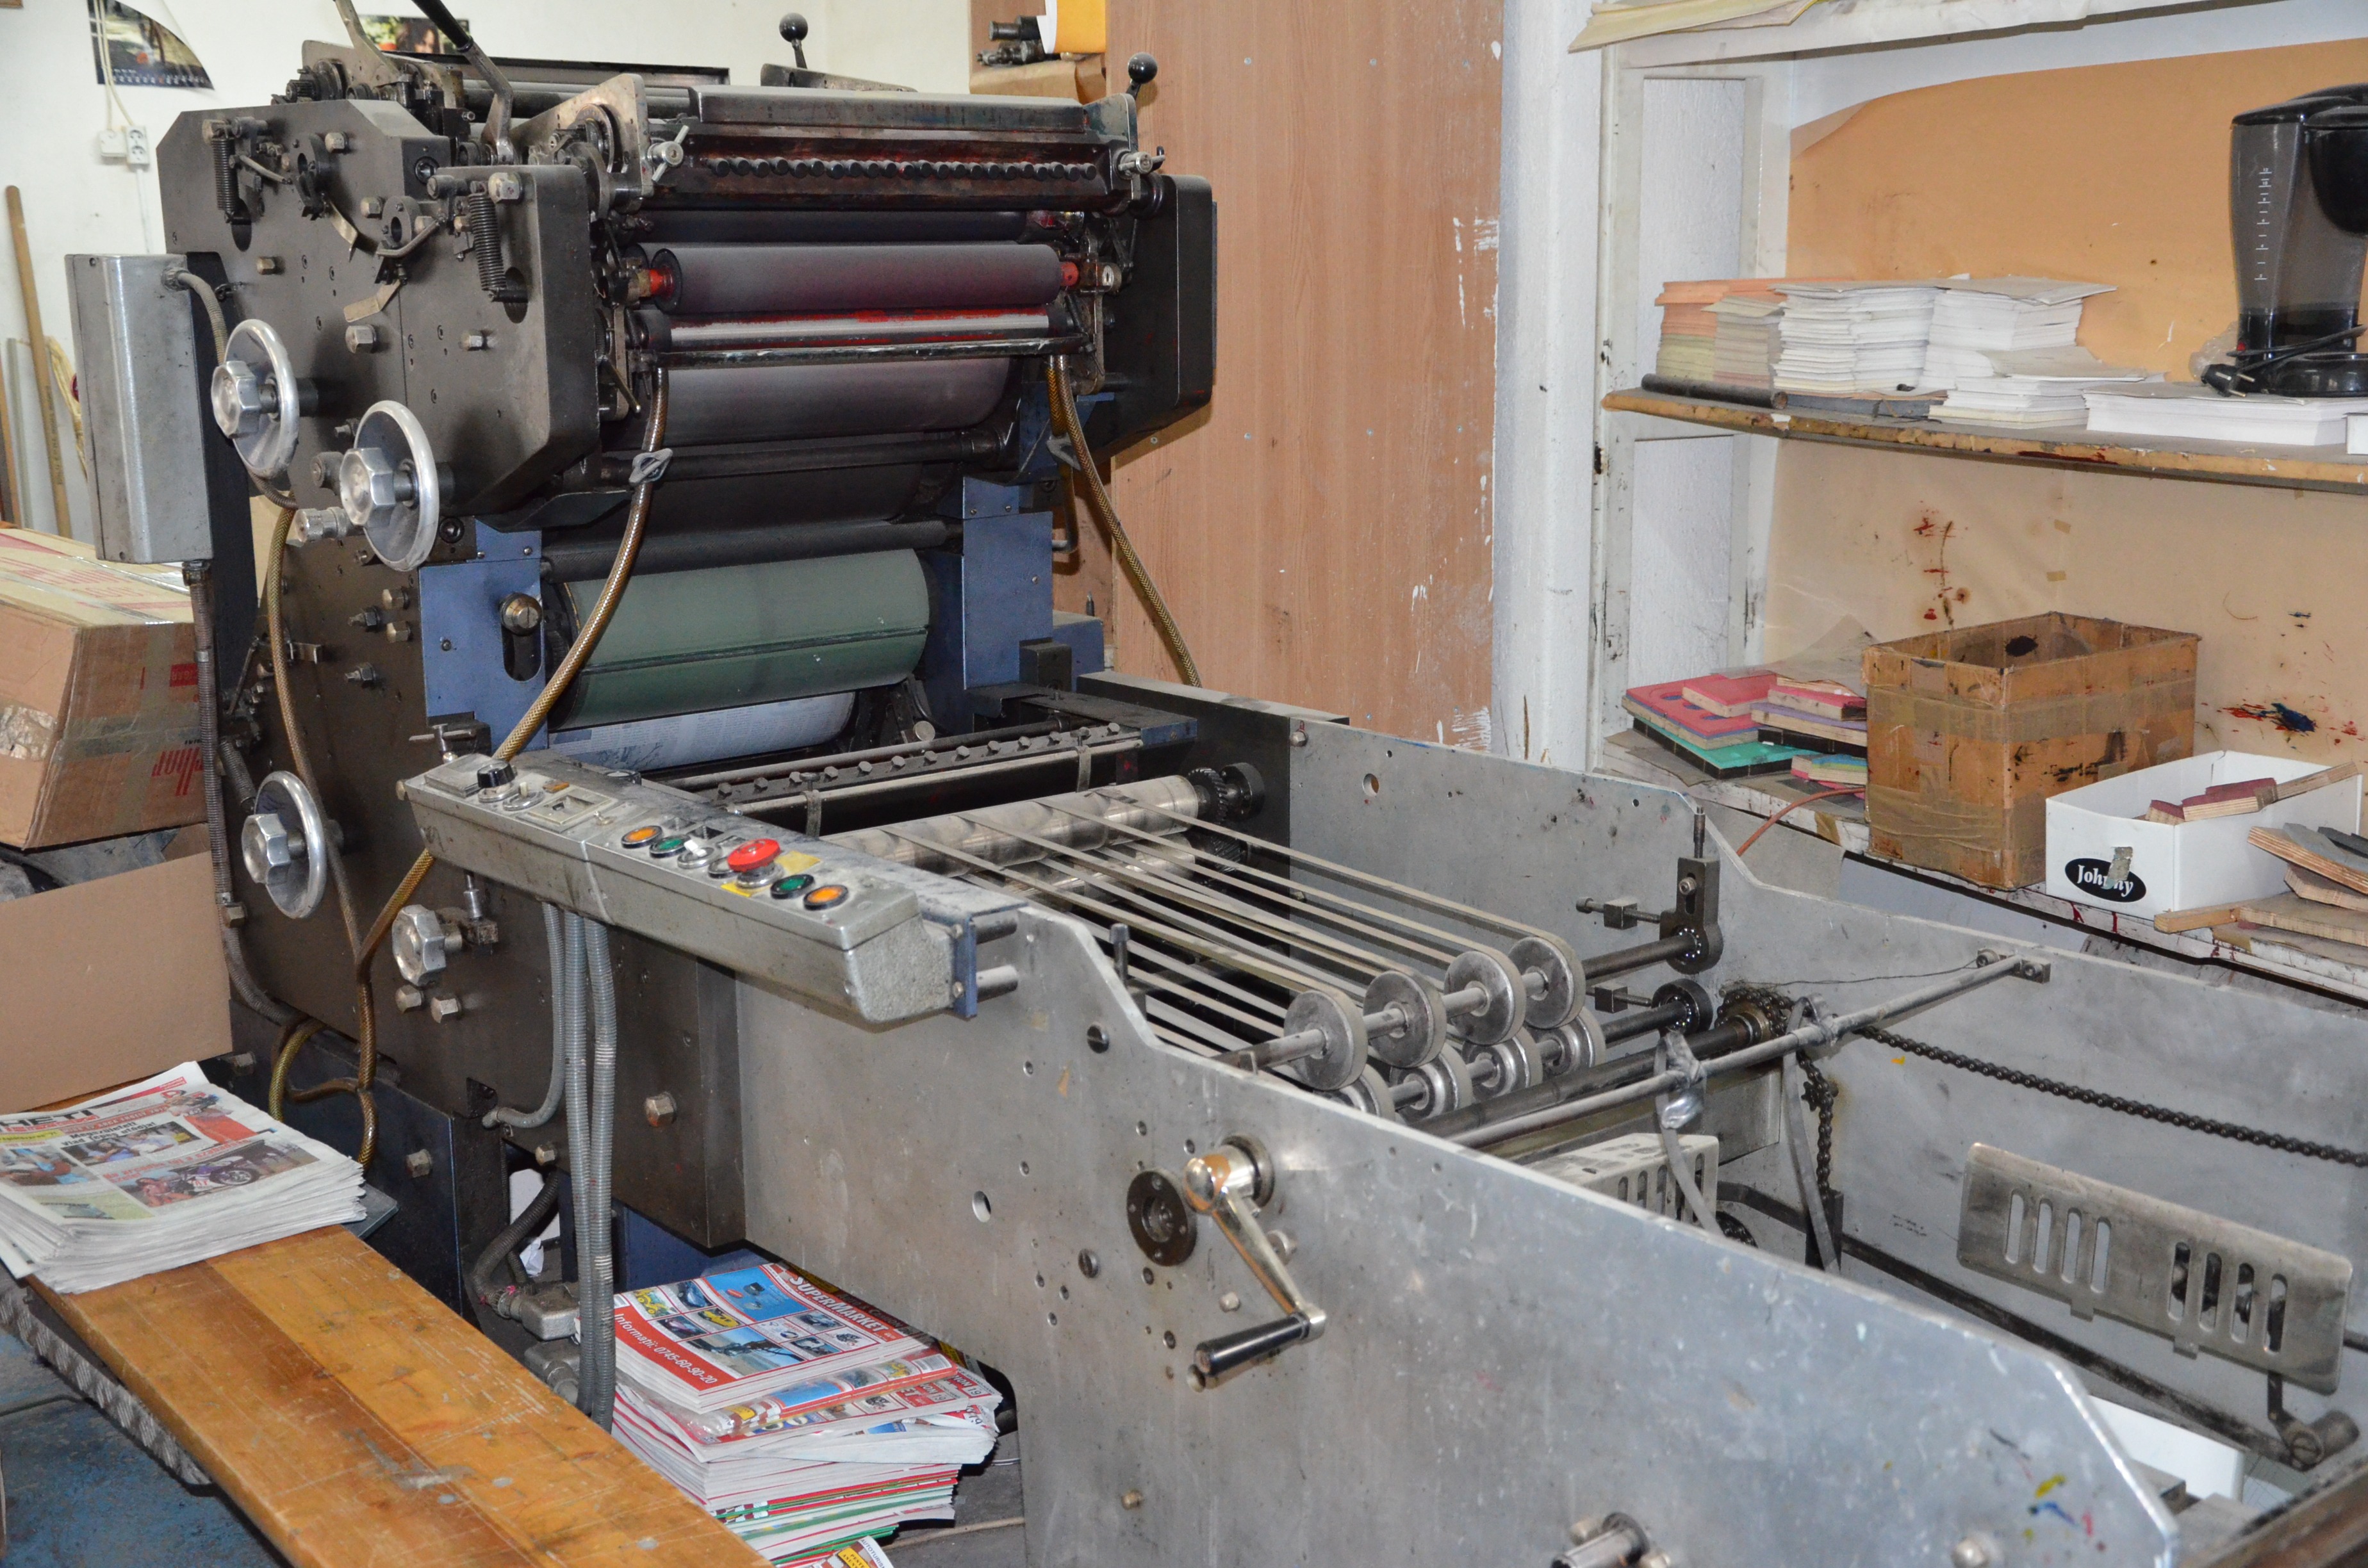 How to Sell or Buy Used Printing Equipment